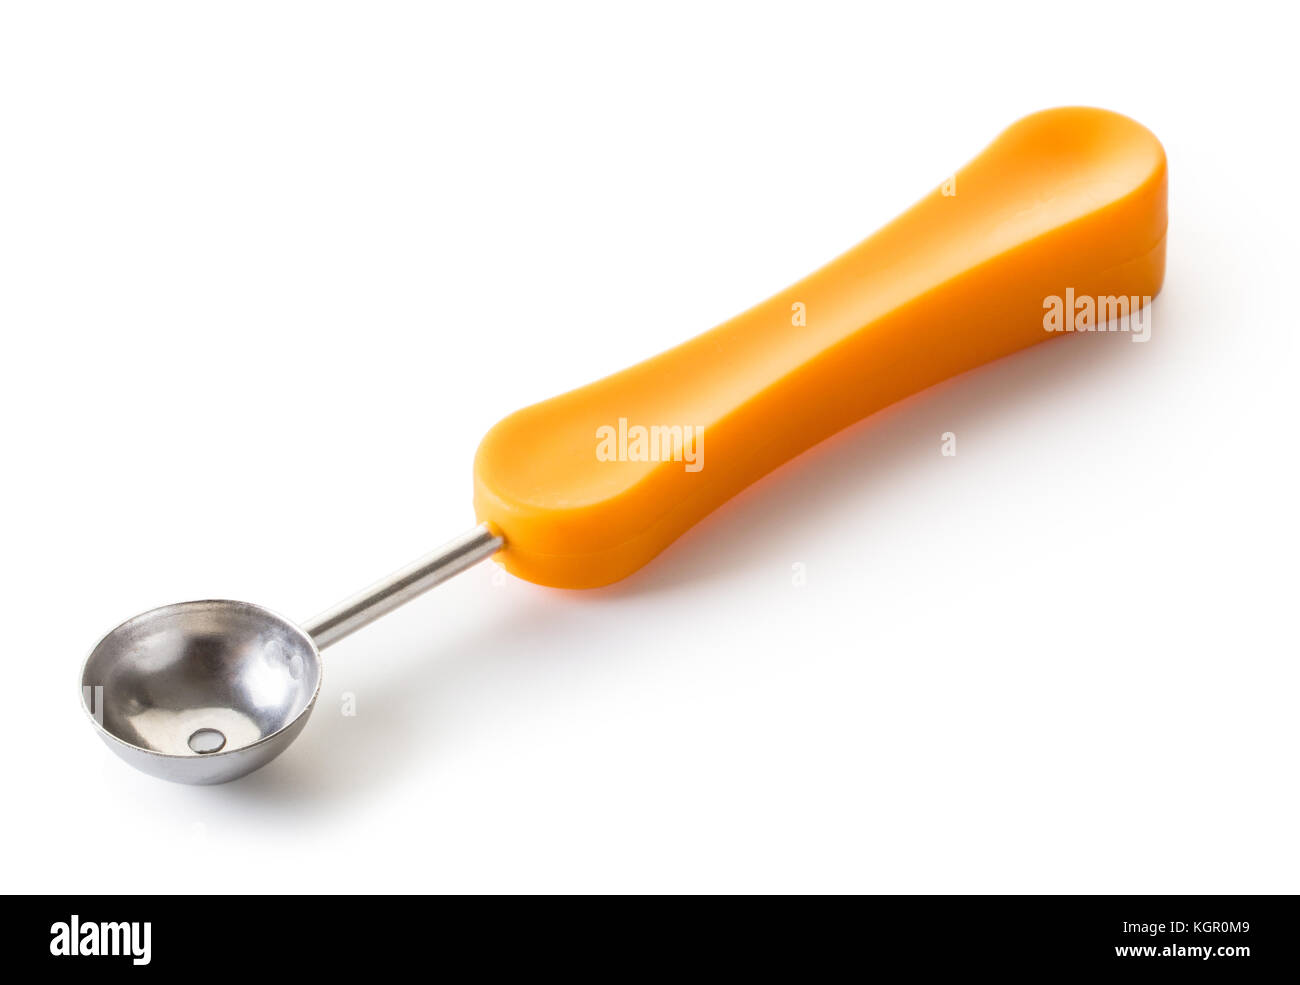 https://c8.alamy.com/comp/KGR0M9/kitchen-tool-for-slicing-balls-from-fruits-and-vegetables-on-white-KGR0M9.jpg